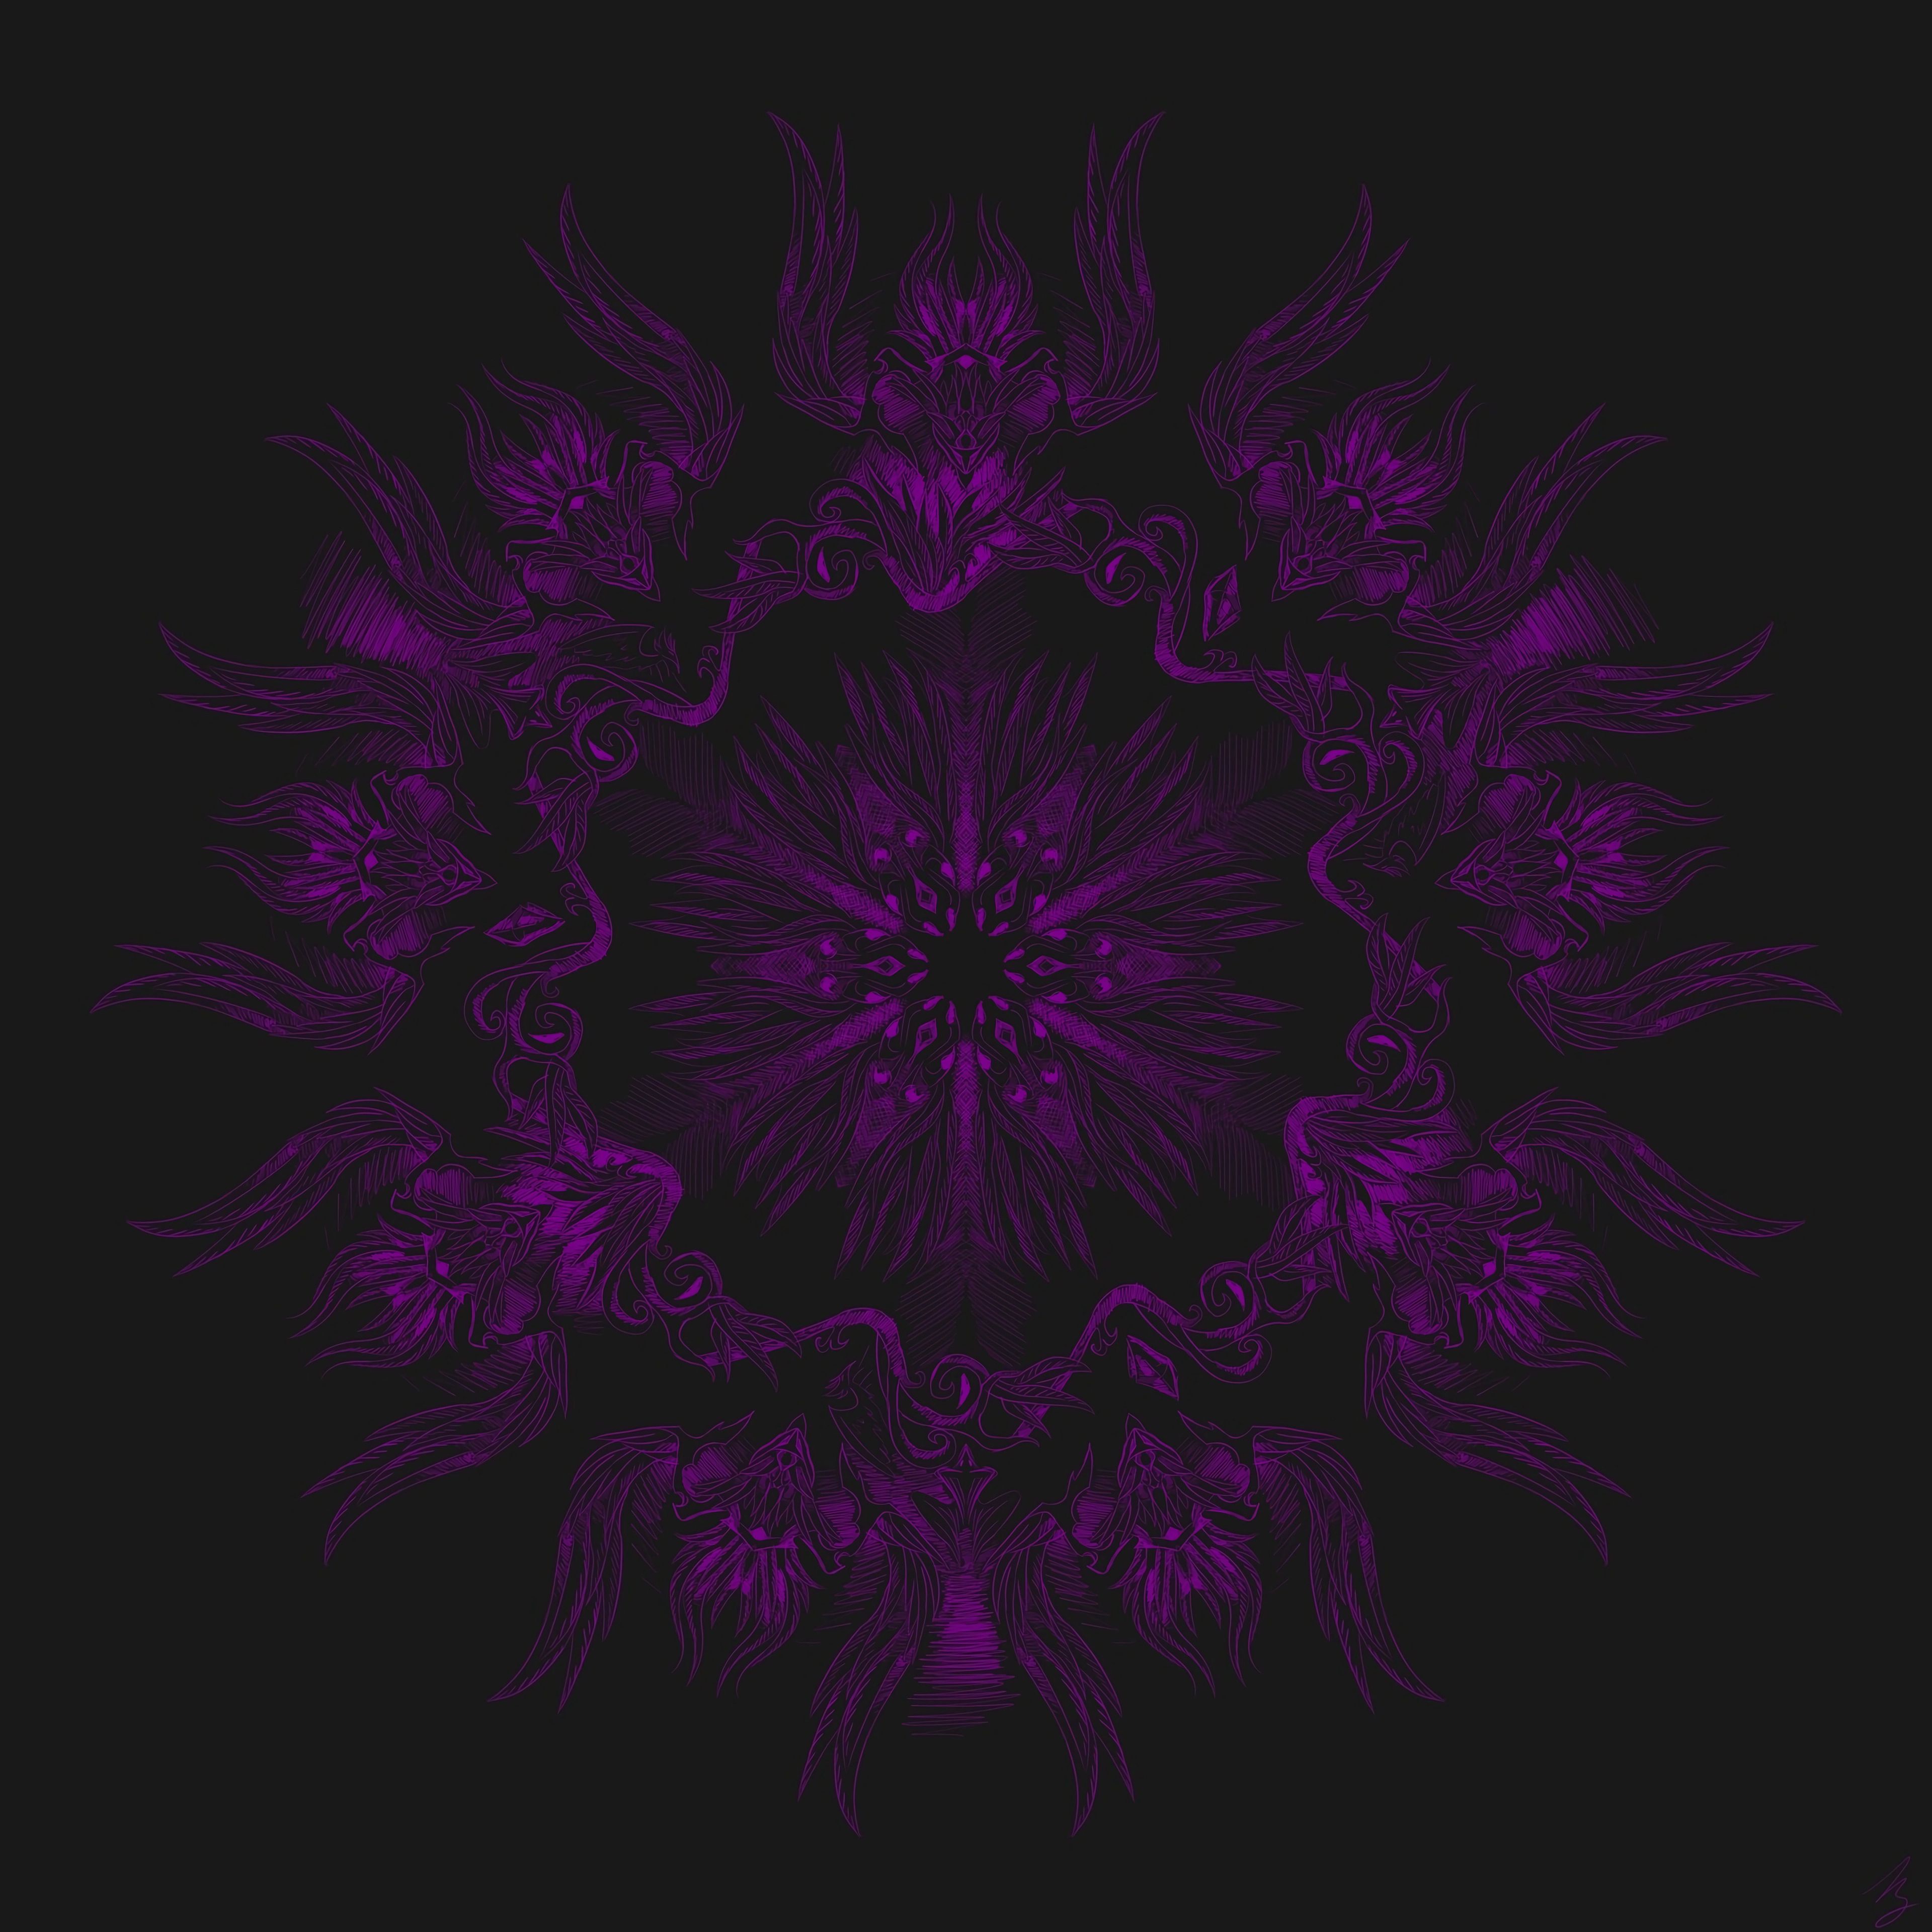 154305 Screensavers and Wallpapers Mandala for phone. Download abstract, violet, dark, pattern, purple, mandala pictures for free